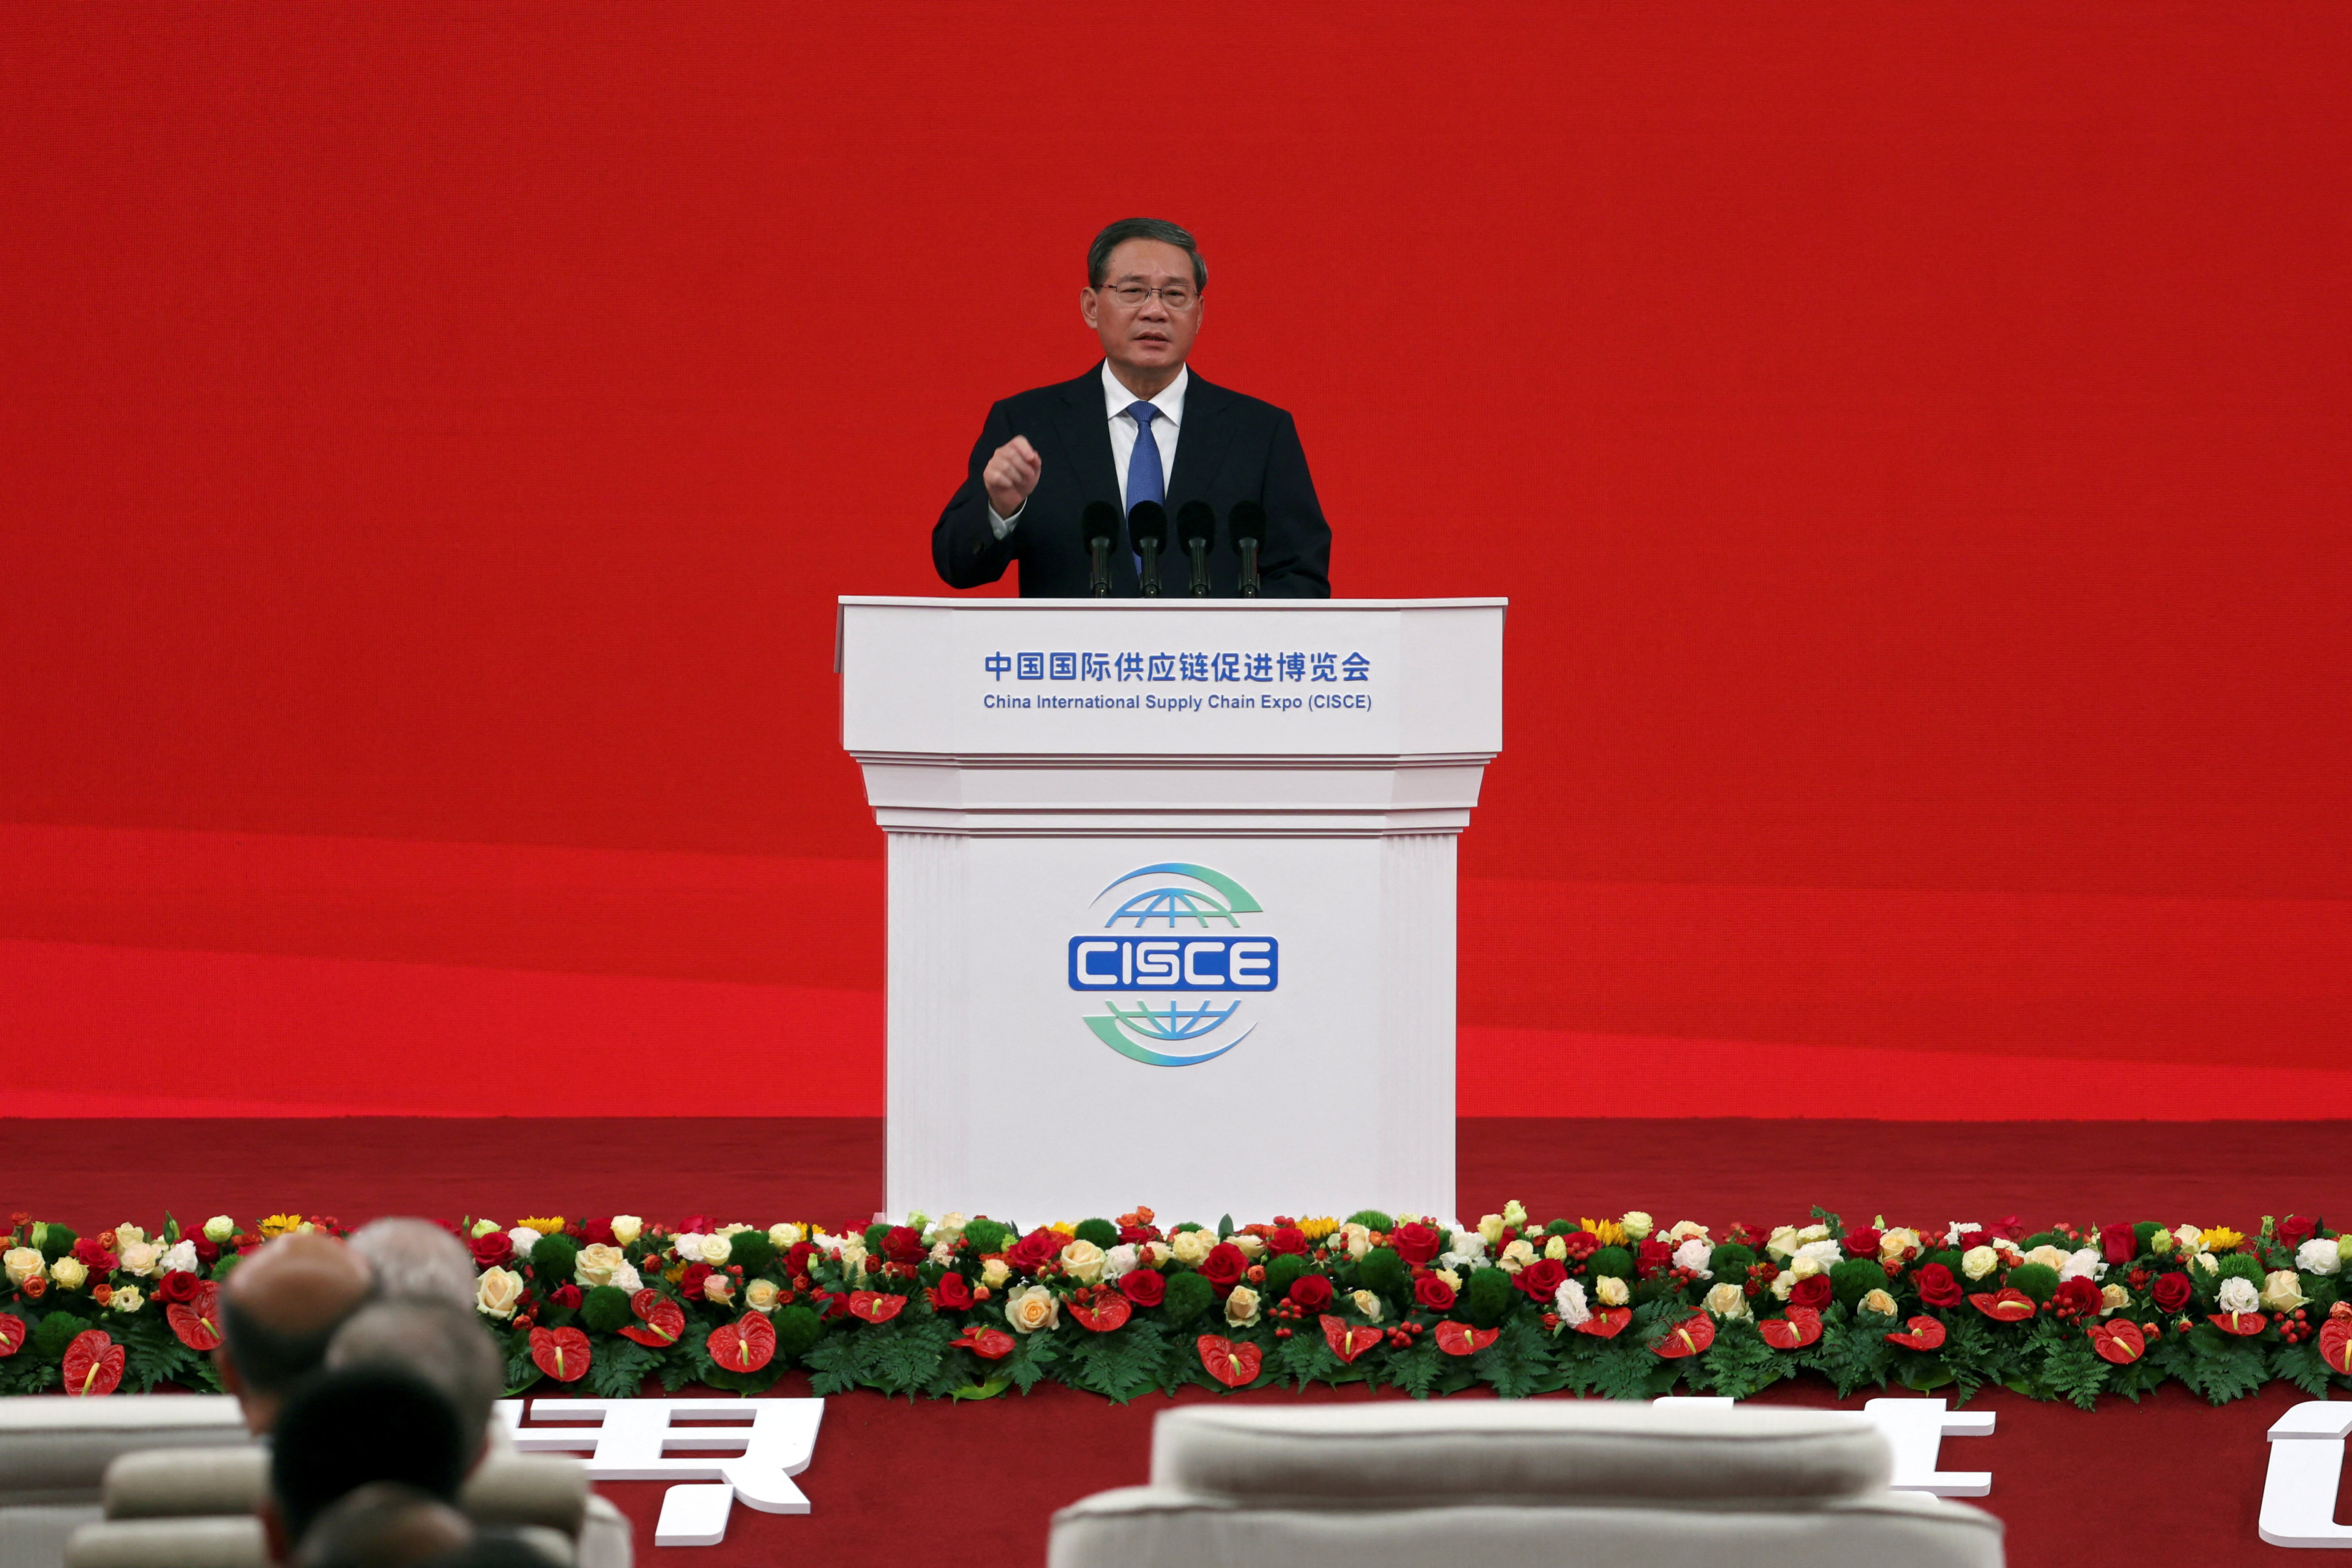 Premier Li Qiang spoke during the opening ceremony of the inaugural China International Supply Chain Expo on Tuesday in Beijing. Photo: Reuters